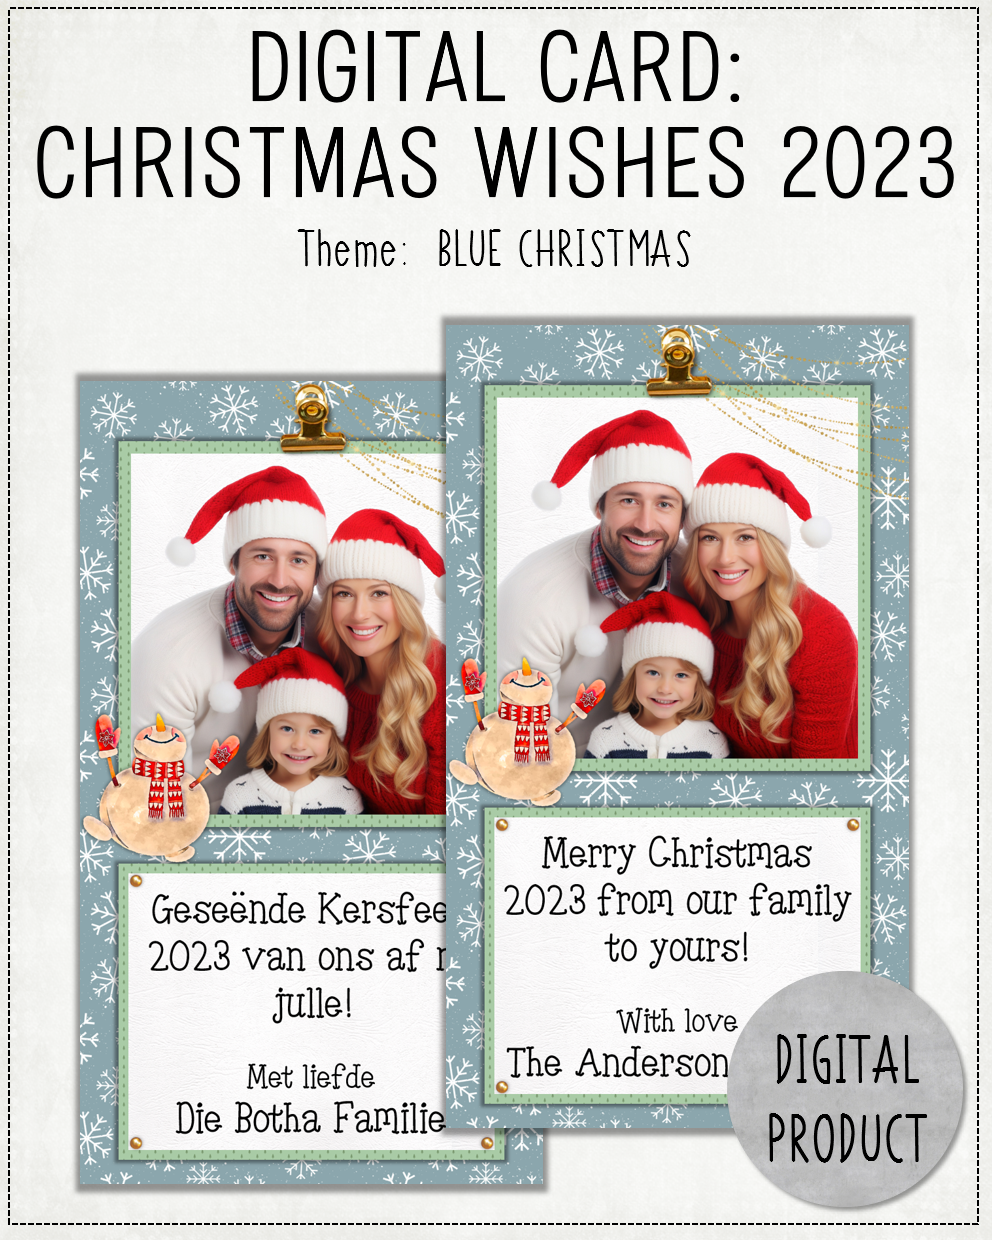 DIGITAL CARD:  Christmas Wishes 2023 - Blue Christmas (Afrikaans / English)